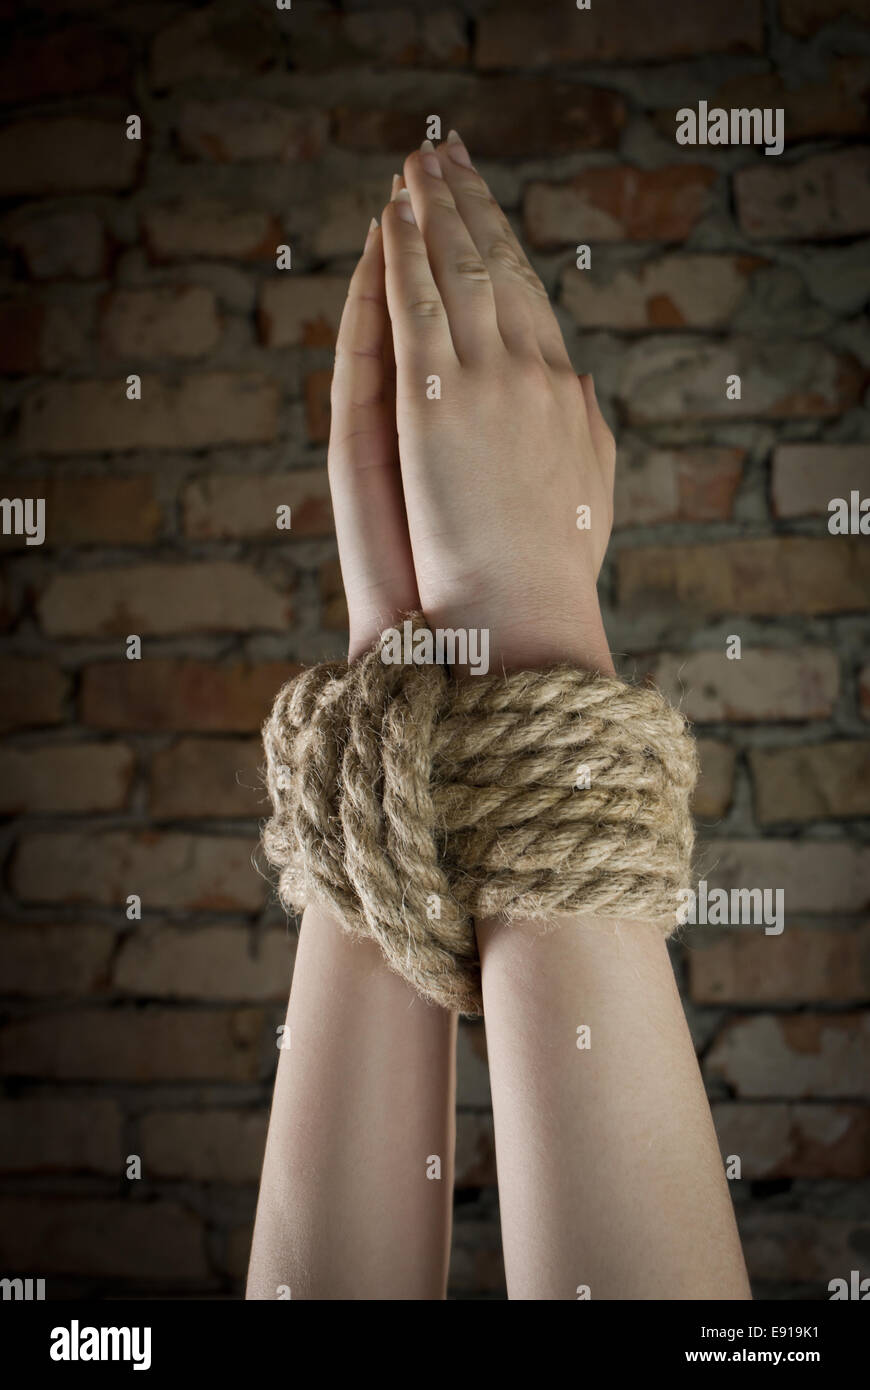 Hands tied up with rope Stock Photo